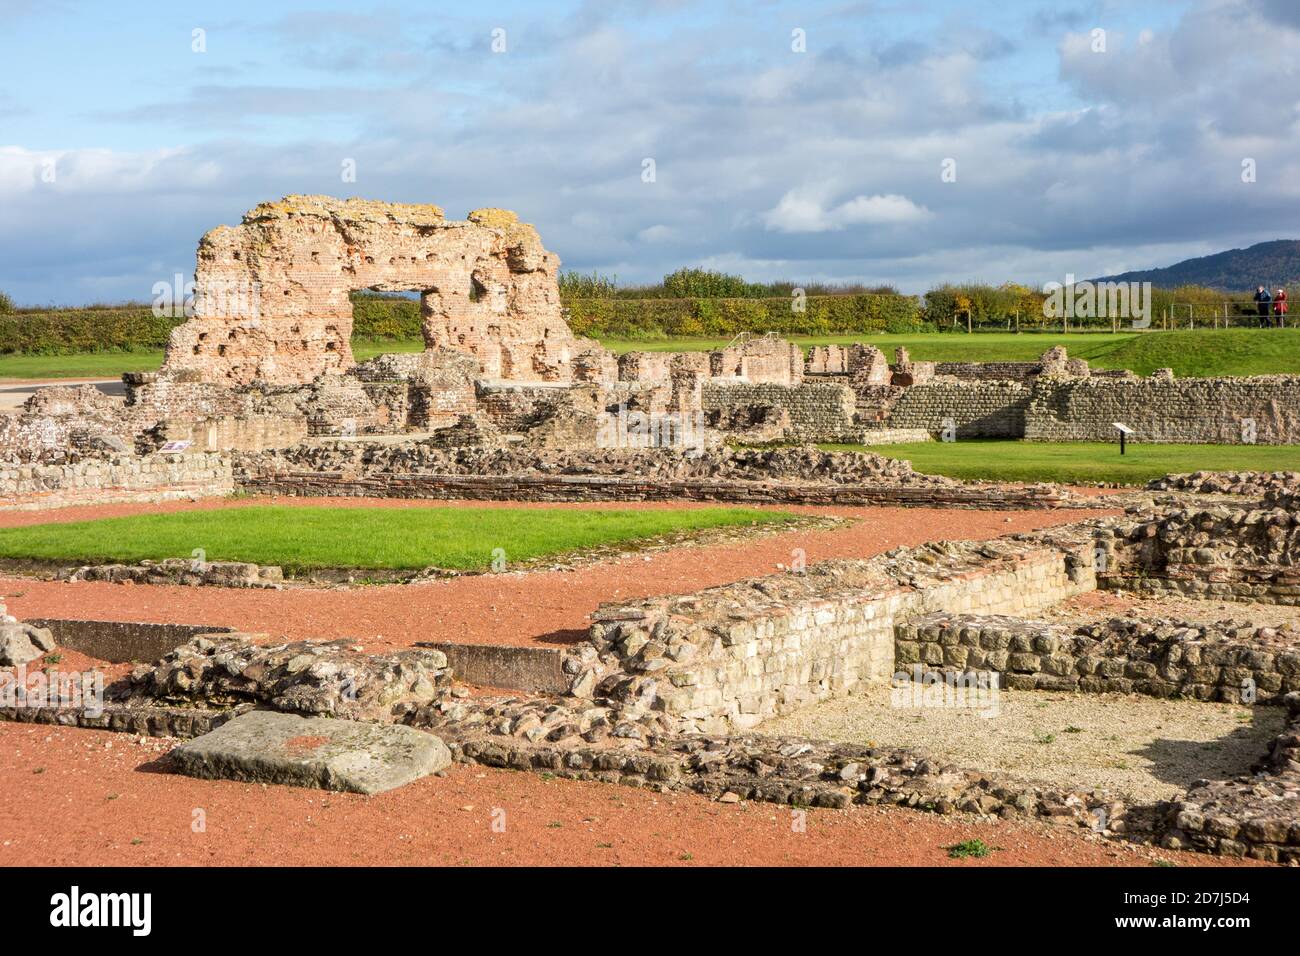 Roman remains of Wroxeter, Viroconium Cornoviorum, the fourth largest city in Roman Britain, situated just outside Shrewsbury in Shropshire England Stock Photo